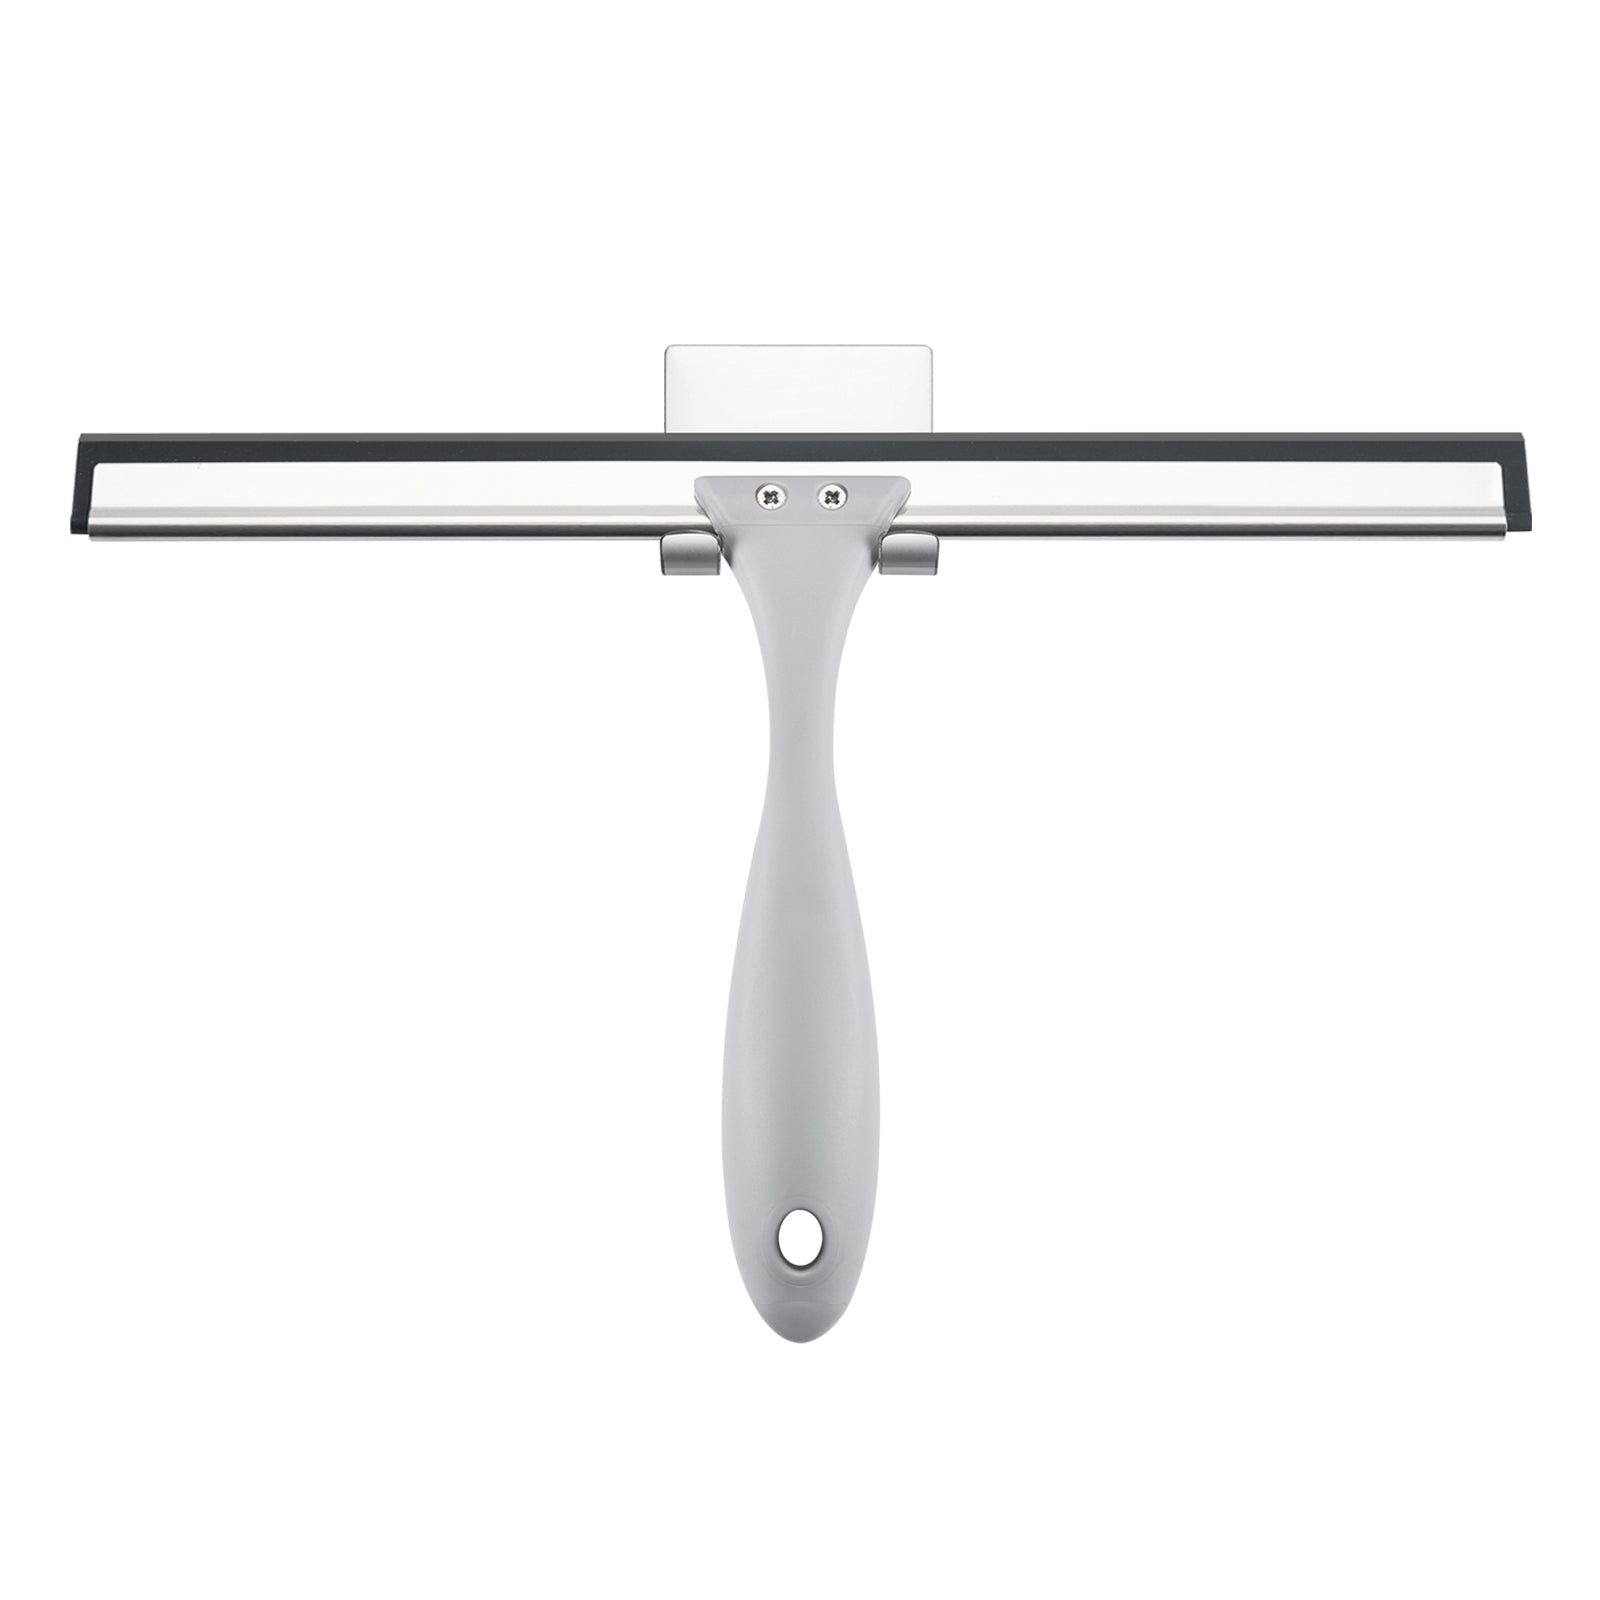 Grey and white shower squeegee with rotating hook